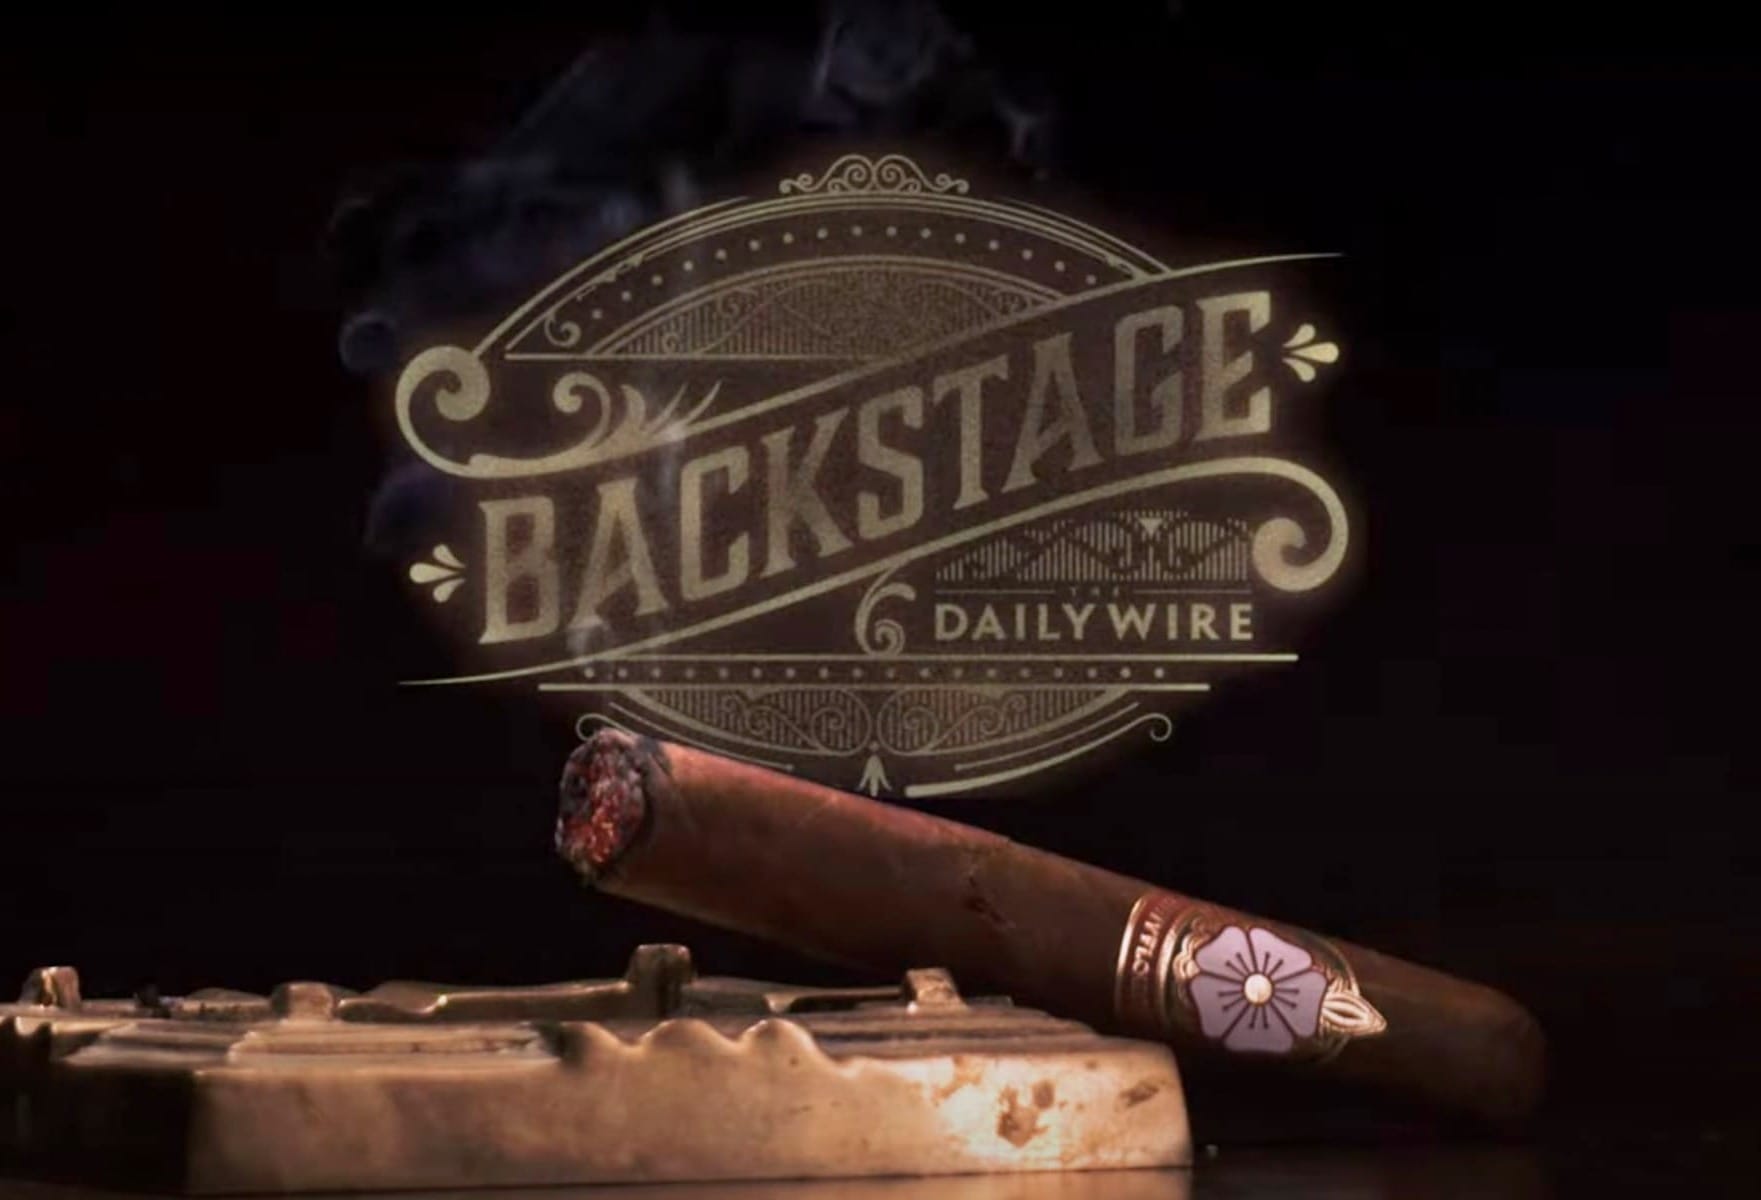 The Daily Wire Finally Releases A Live Backstage Again After Five Months On The Rocks